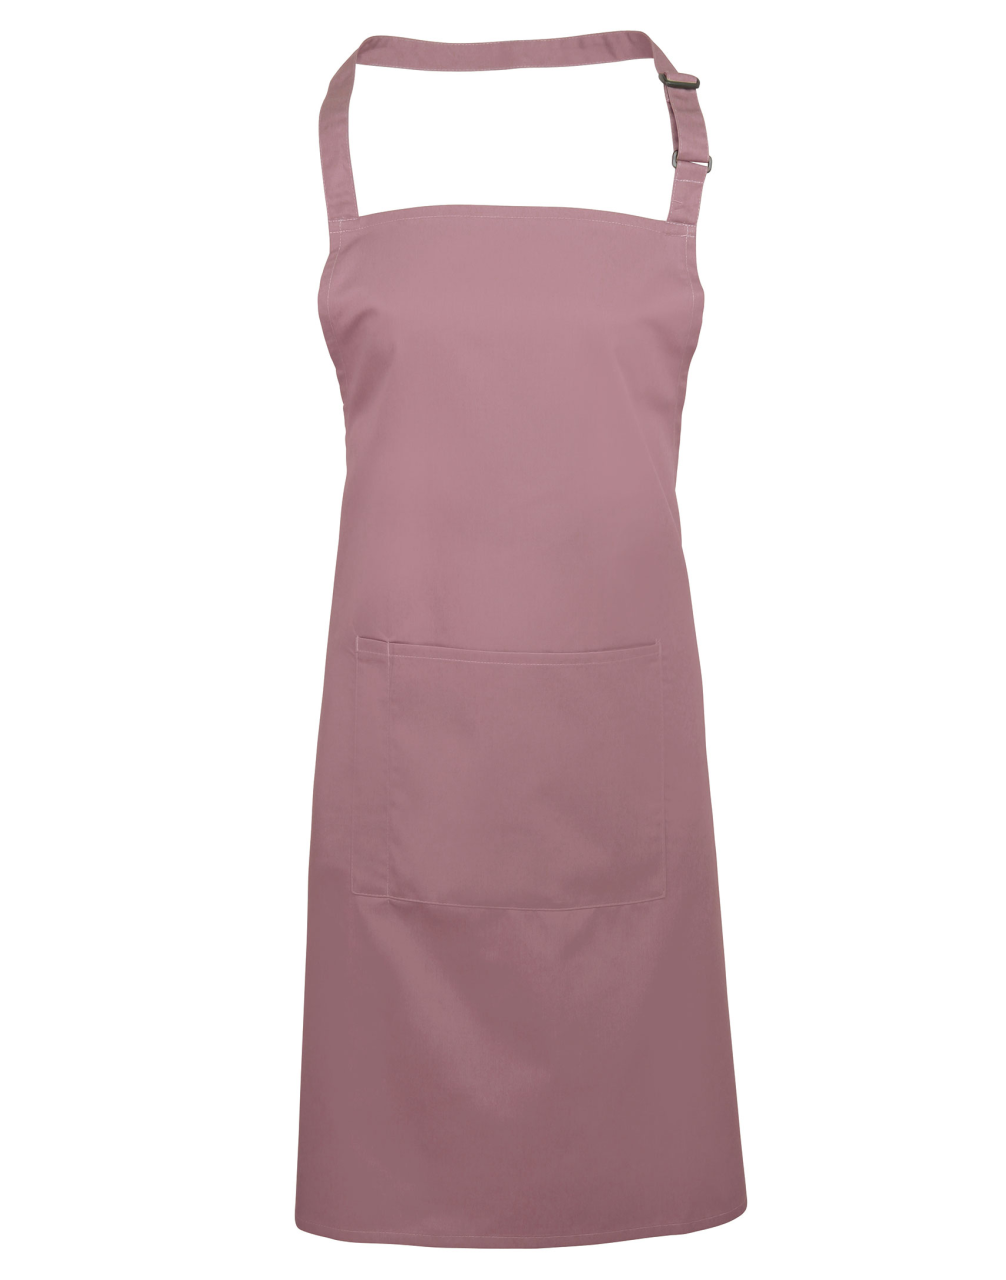 ‘COLOURS COLLECTION’ BIB APRON WITH POCKET s logom 